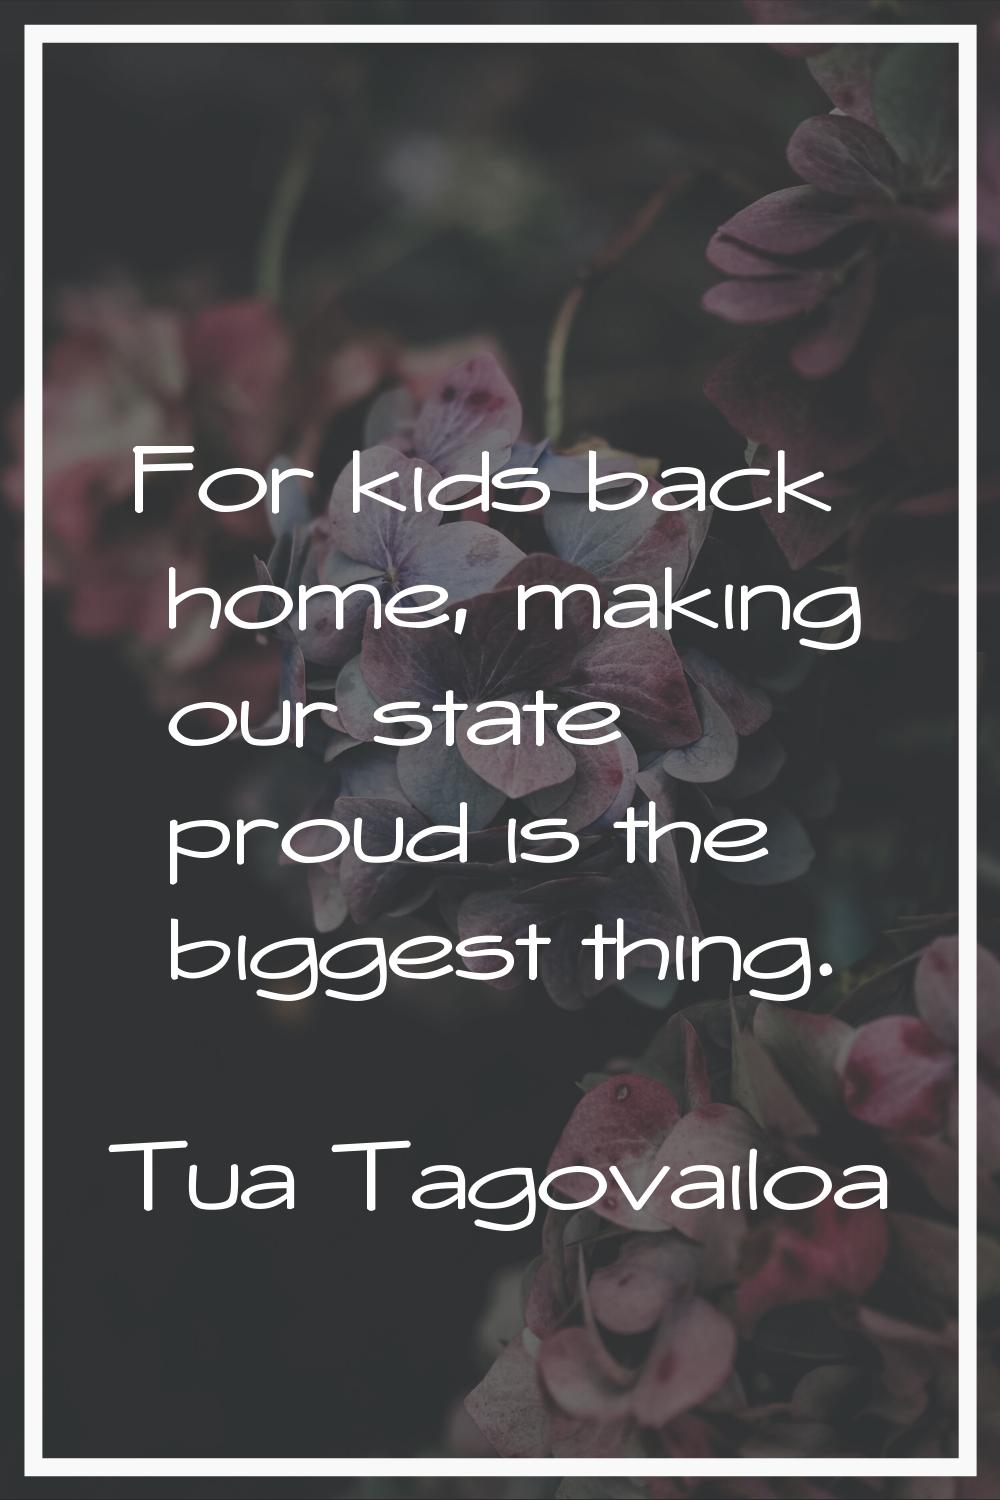 For kids back home, making our state proud is the biggest thing.